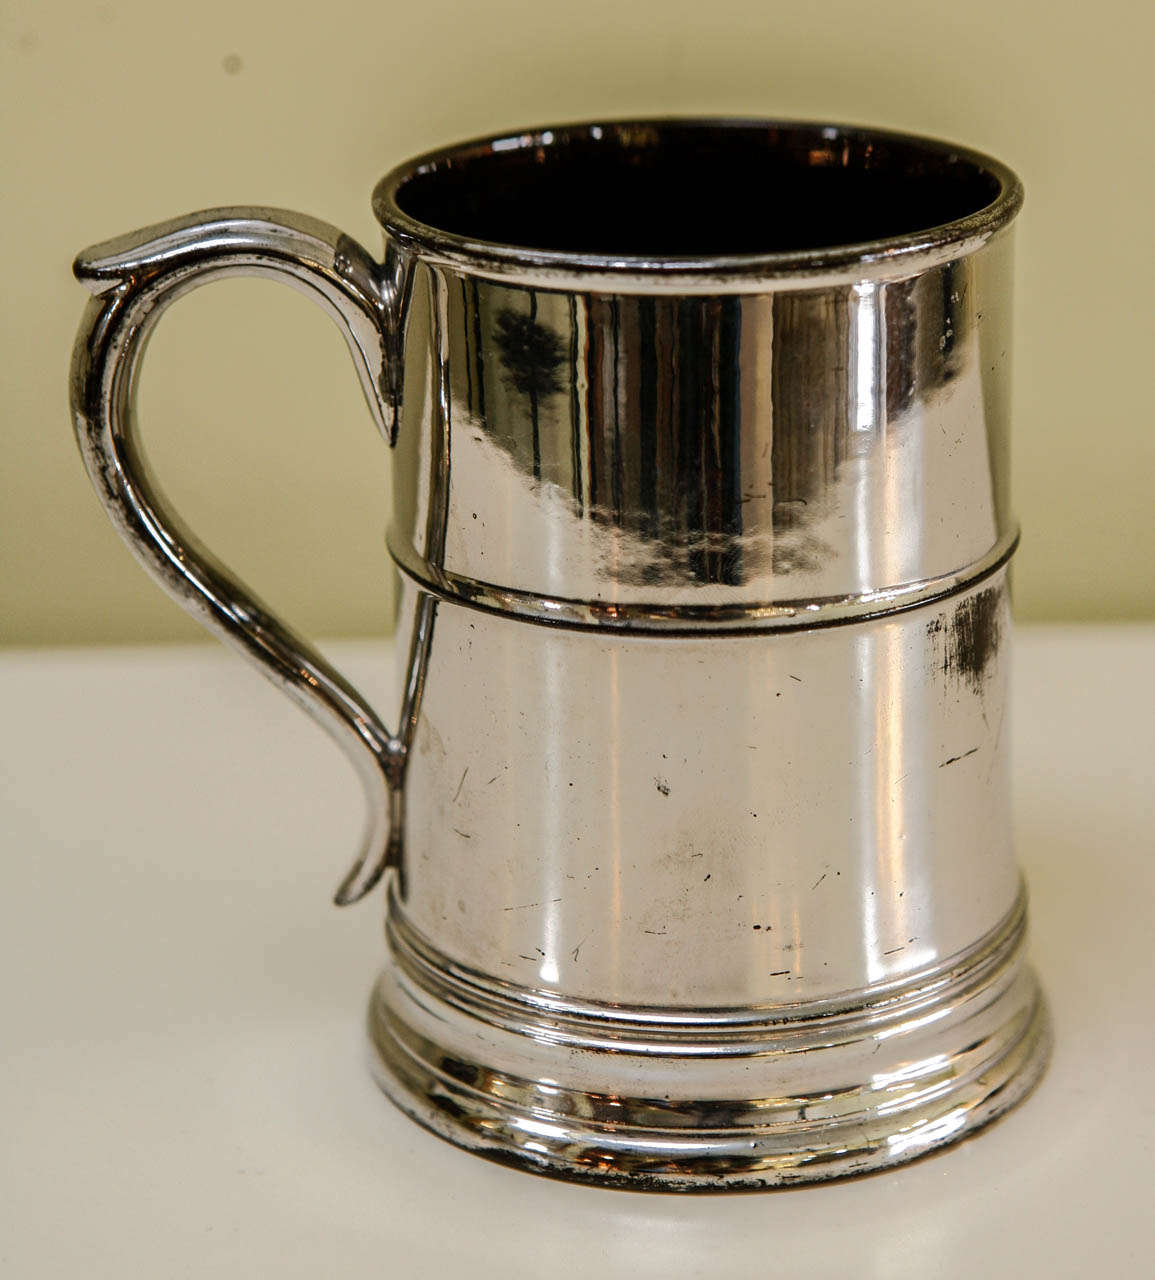 This Silver Luster Tankard, c. 1800, is from a collection purchased for the shop. Silver Luster, known as 